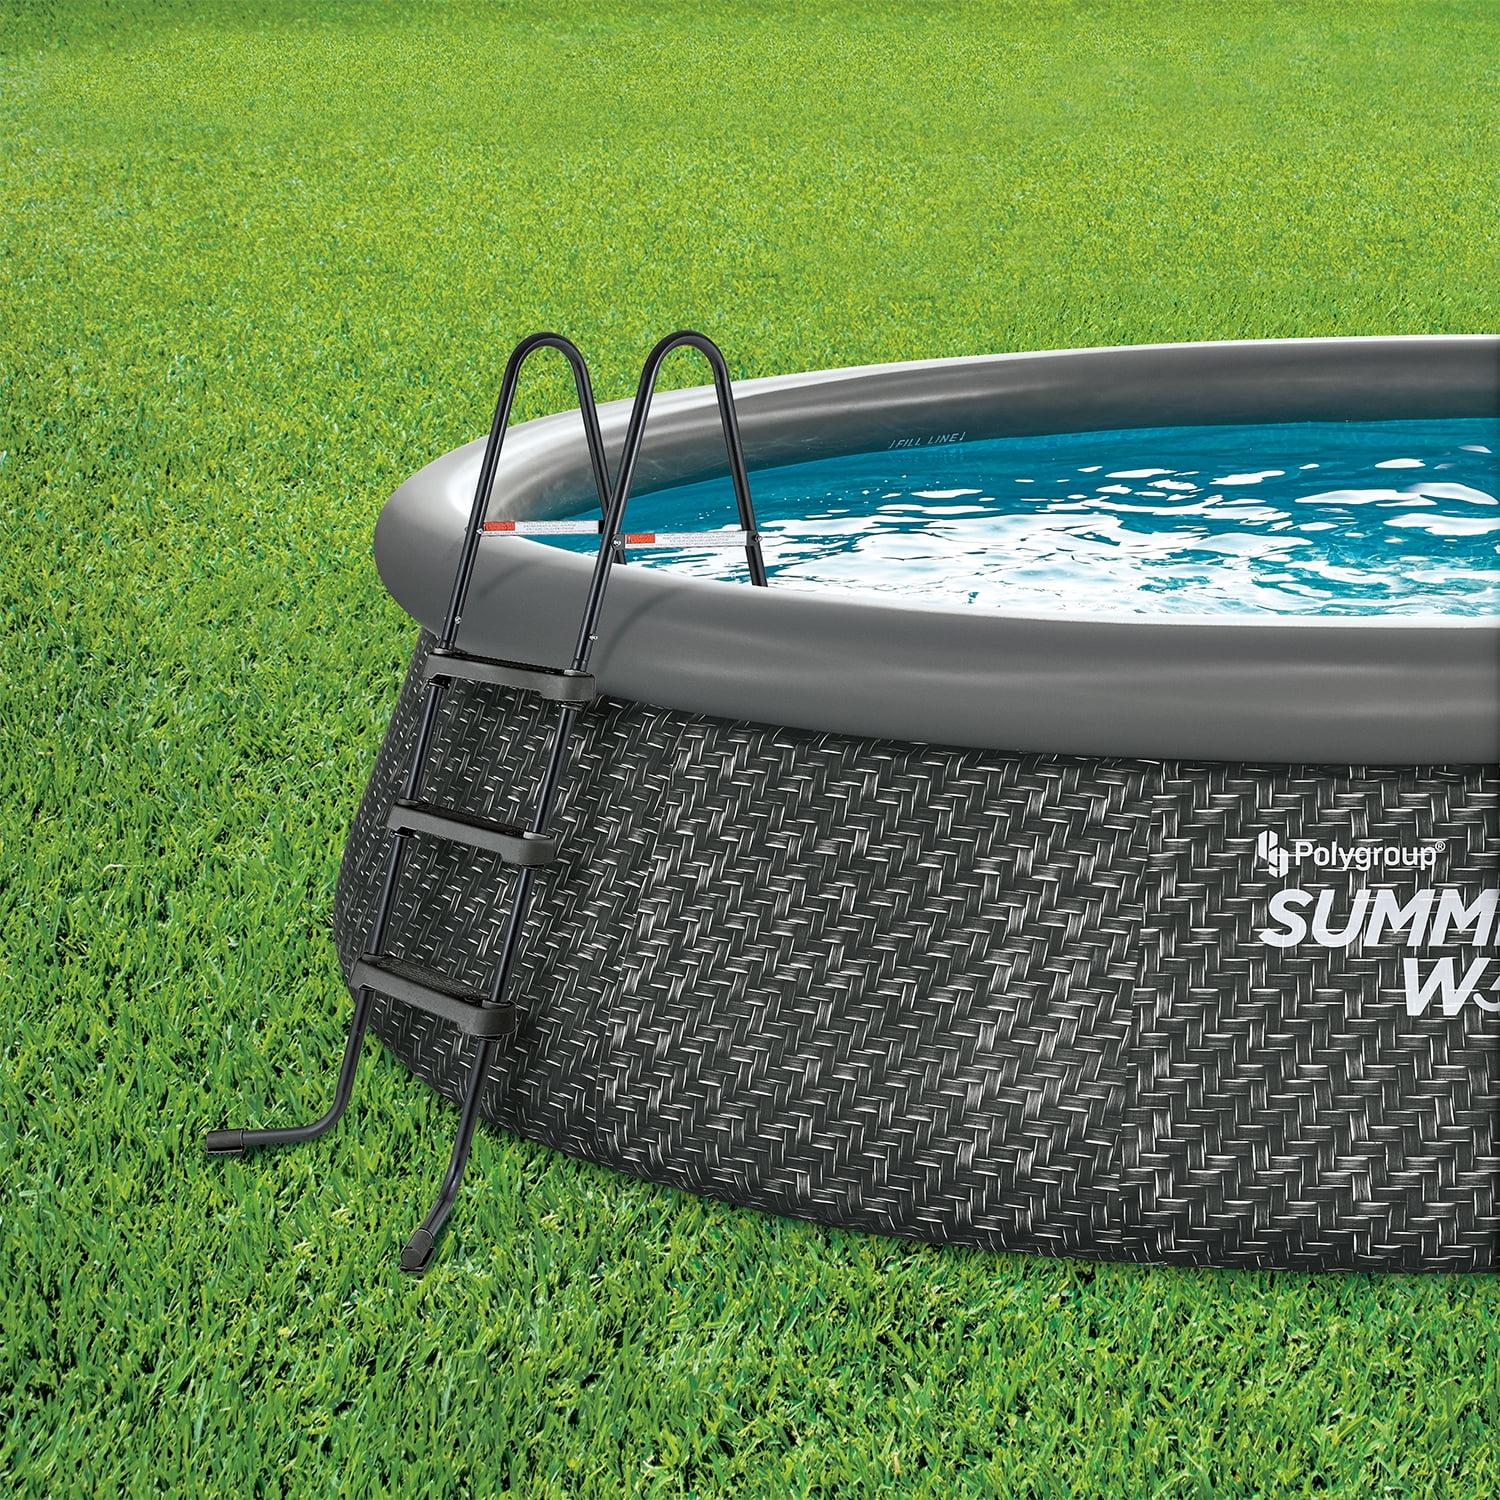 Funsicle P1A01030A 10ft x 30in Round QuickSet Designer Above Ground Pool